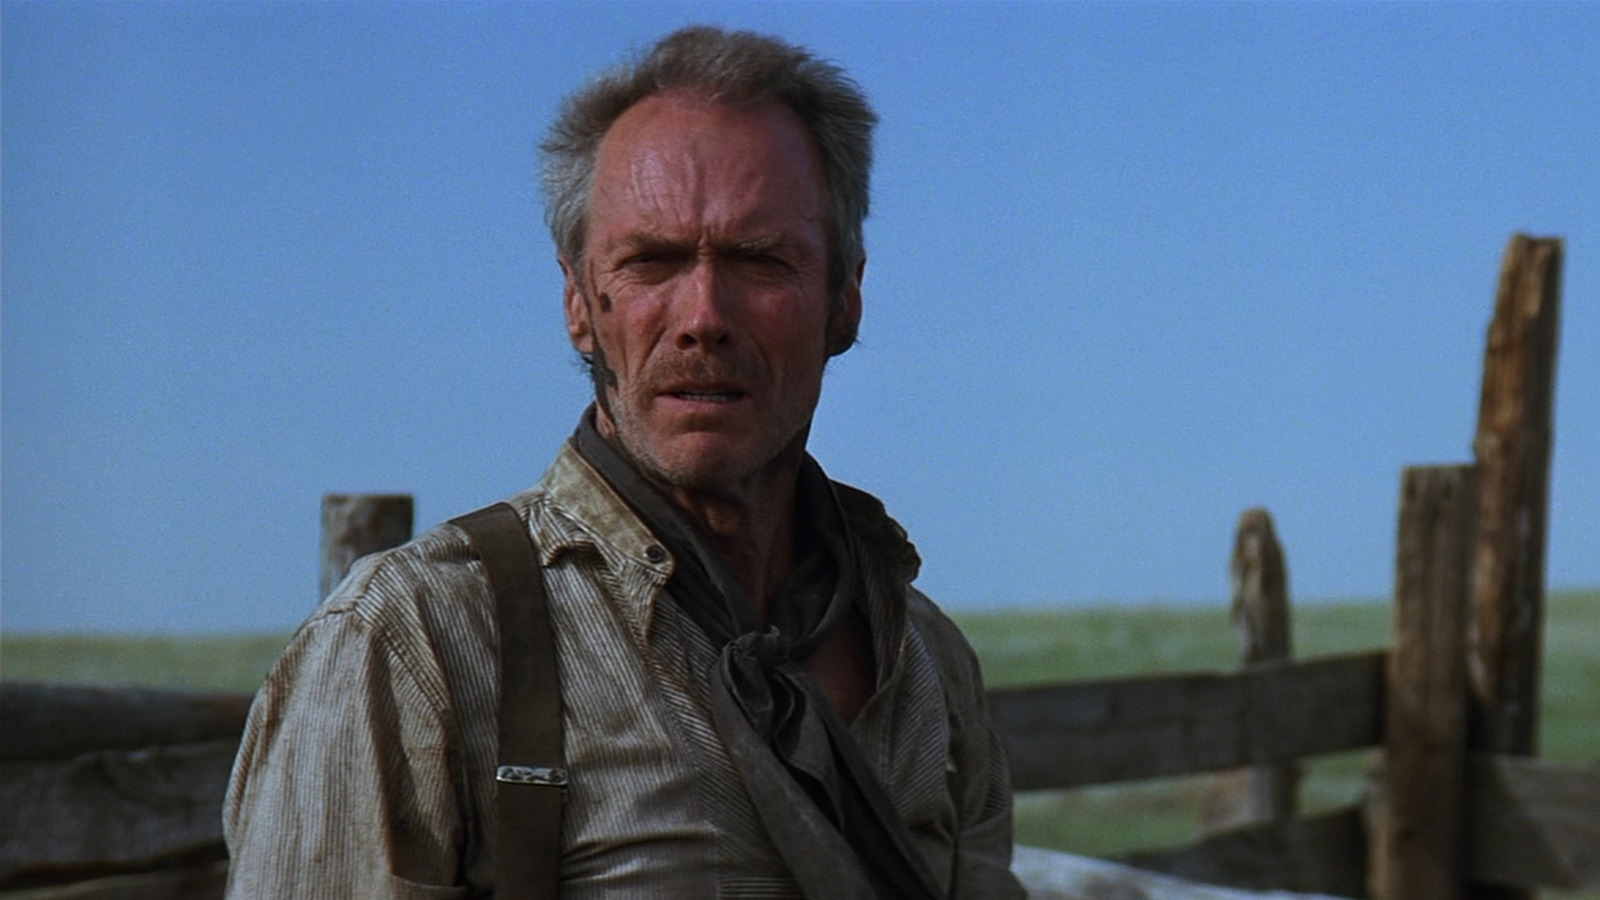 #Clint Eastwood Had An Unusual Commitment To Unforgiven’s Script